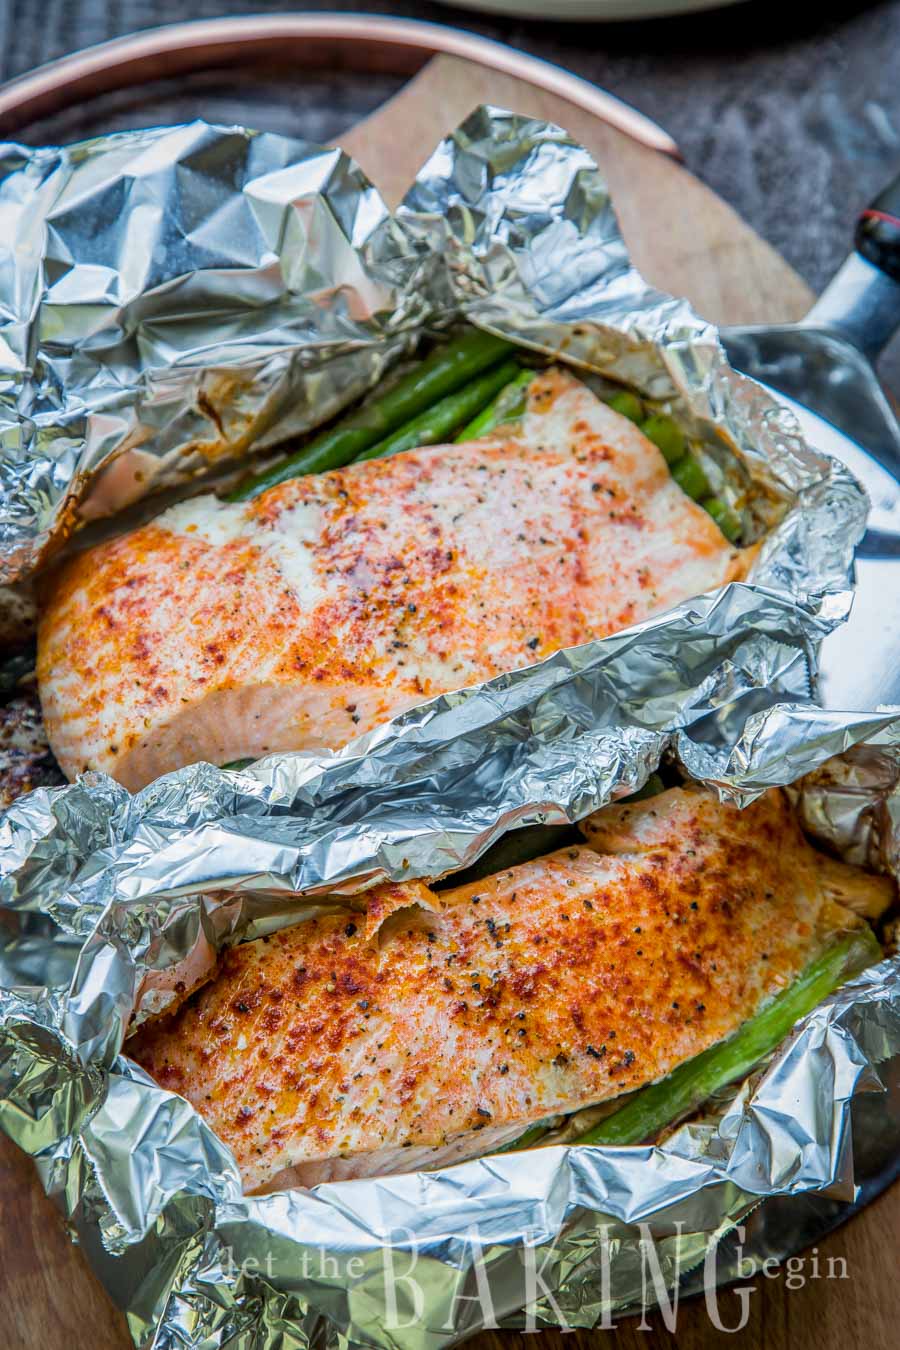 Salmon Asparagus Foil Packets Quick Easy and Delicious dinner. Prep ahead of time then just throw on the grill or in the oven when ready to eat. Camping hacks anyone Let the Baking Begin 5 1